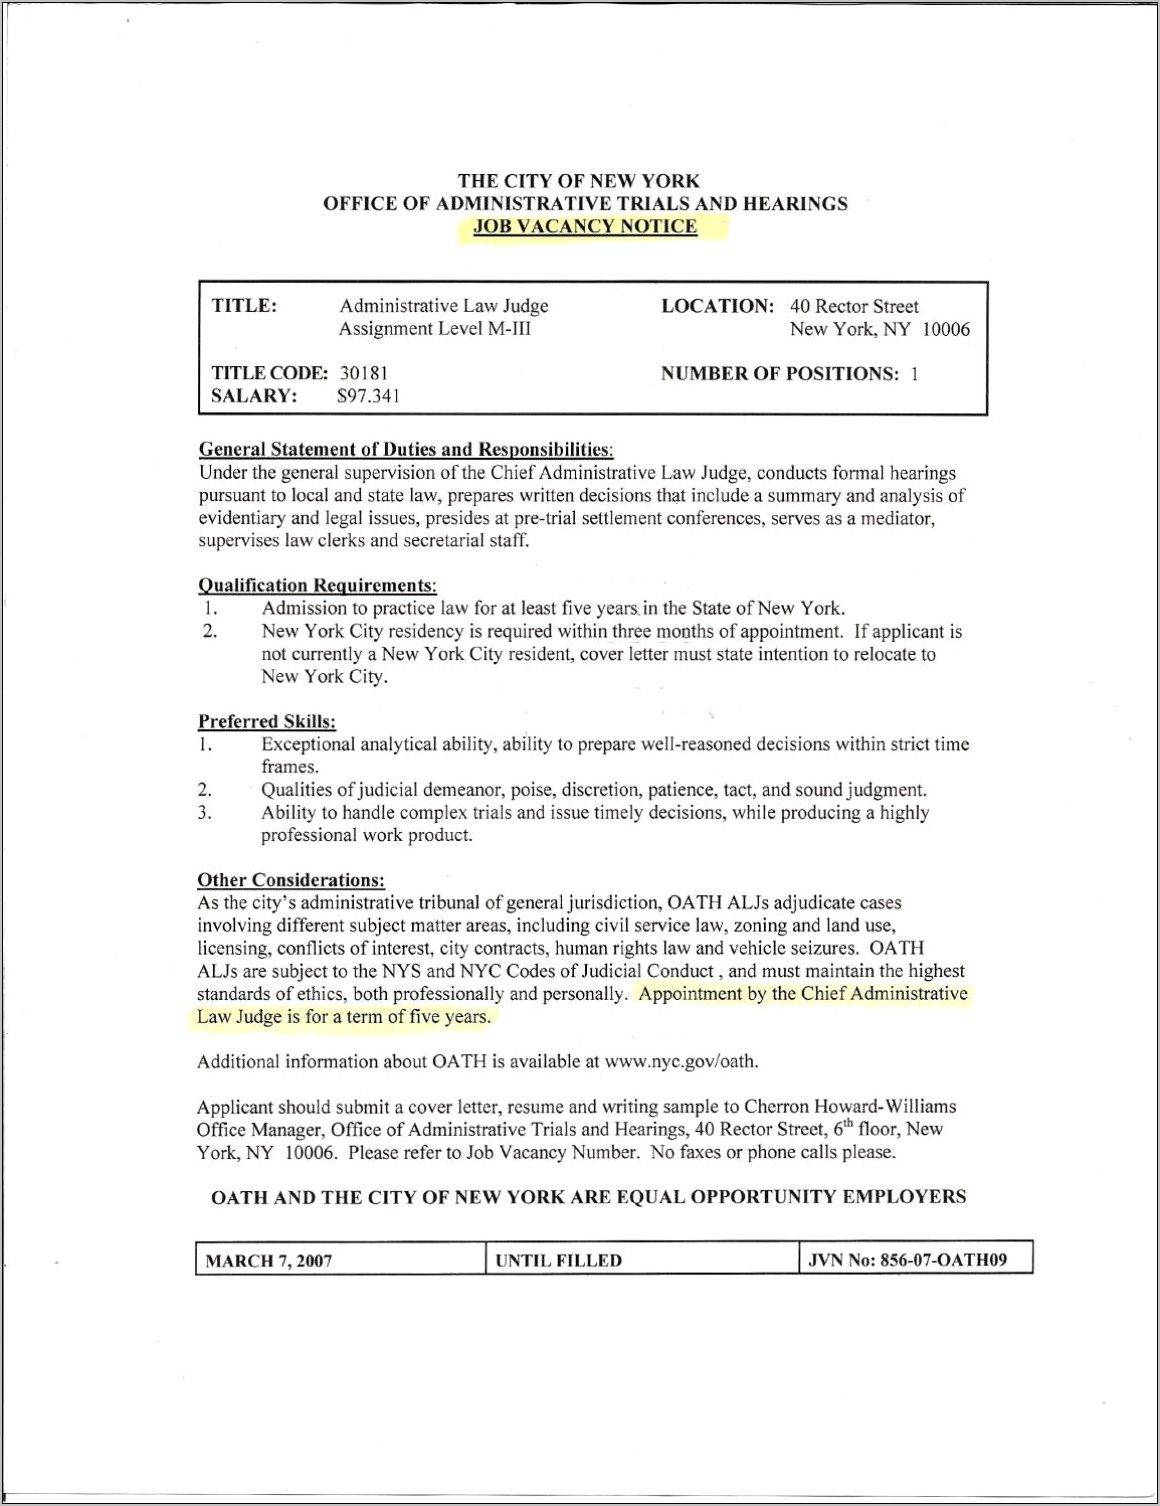 Example Resume Assignment Judge Law Clerk